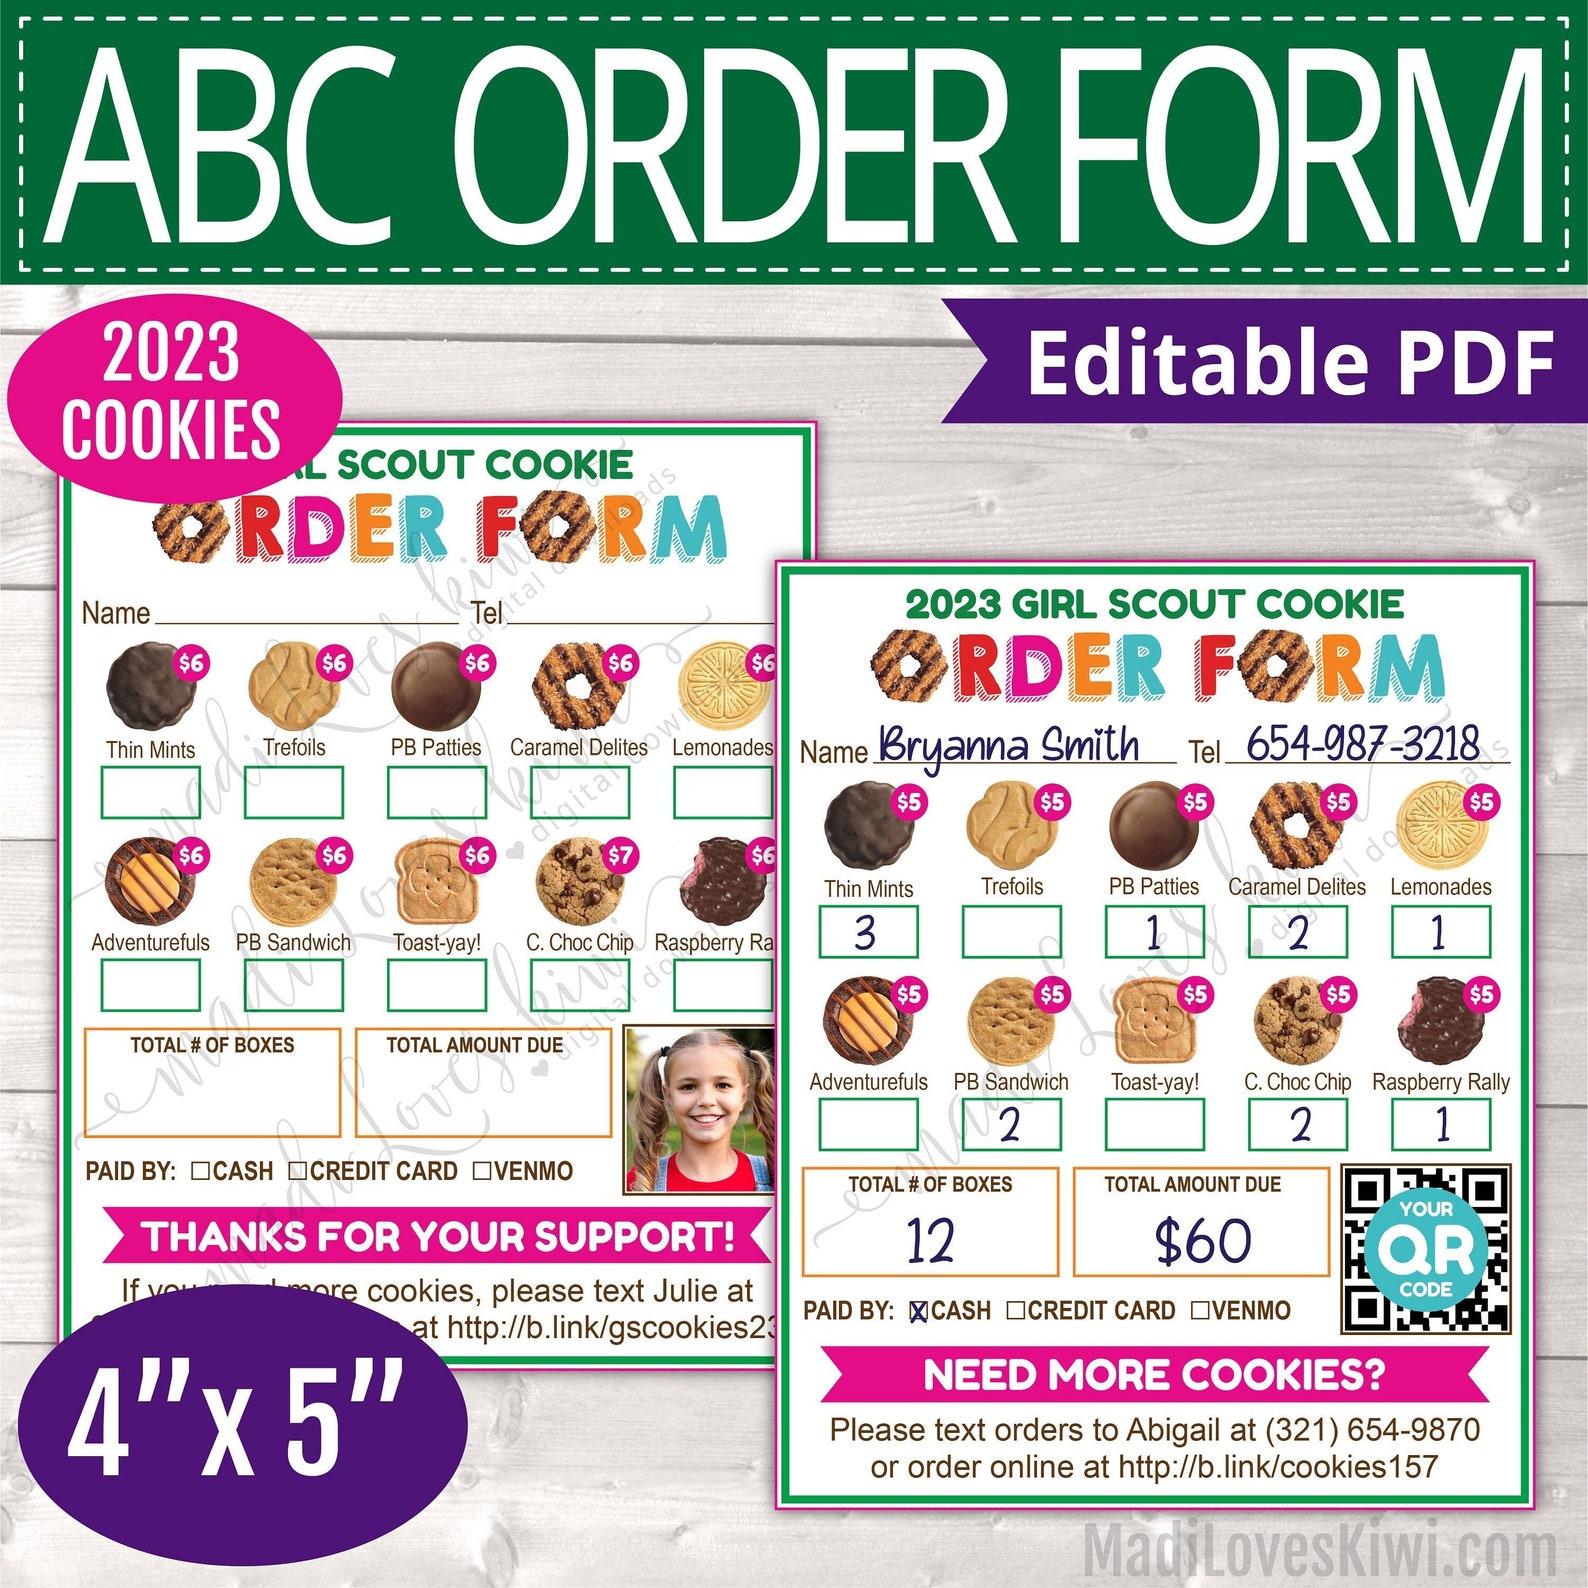 2023-abc-girl-scout-cookie-order-form-printable-editable-sale-etsy